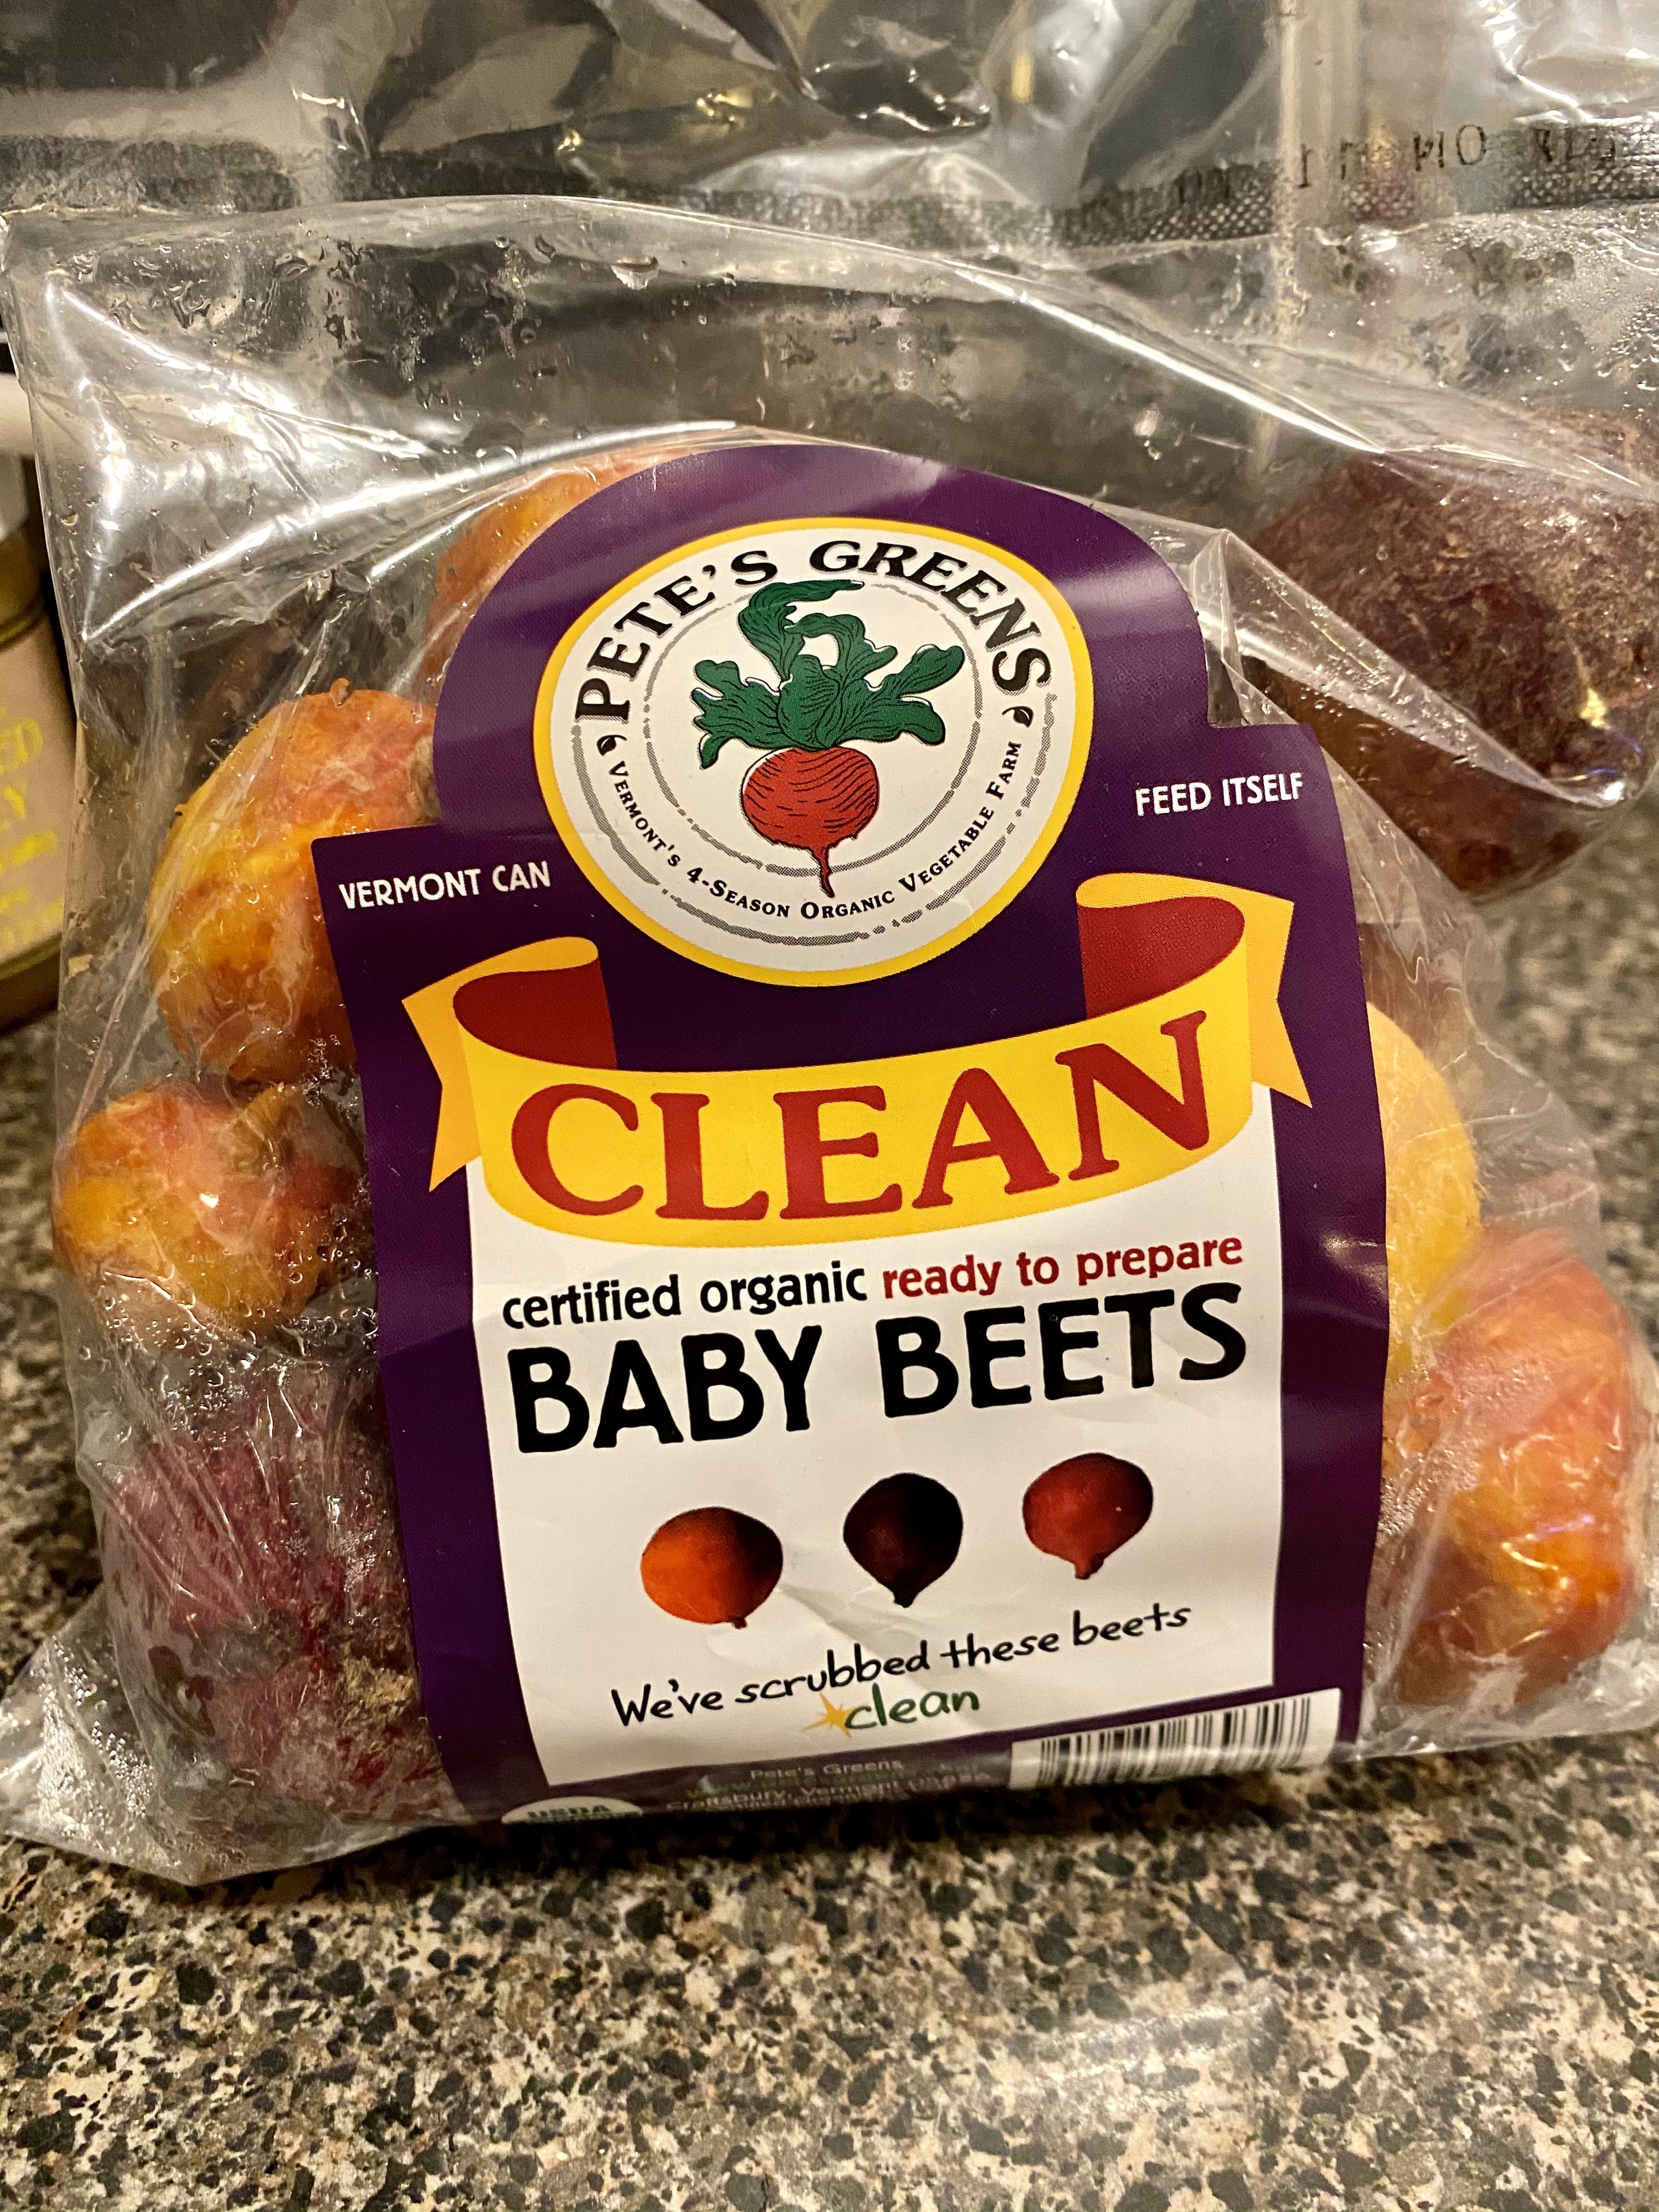 Pete's Greens Baby Beets